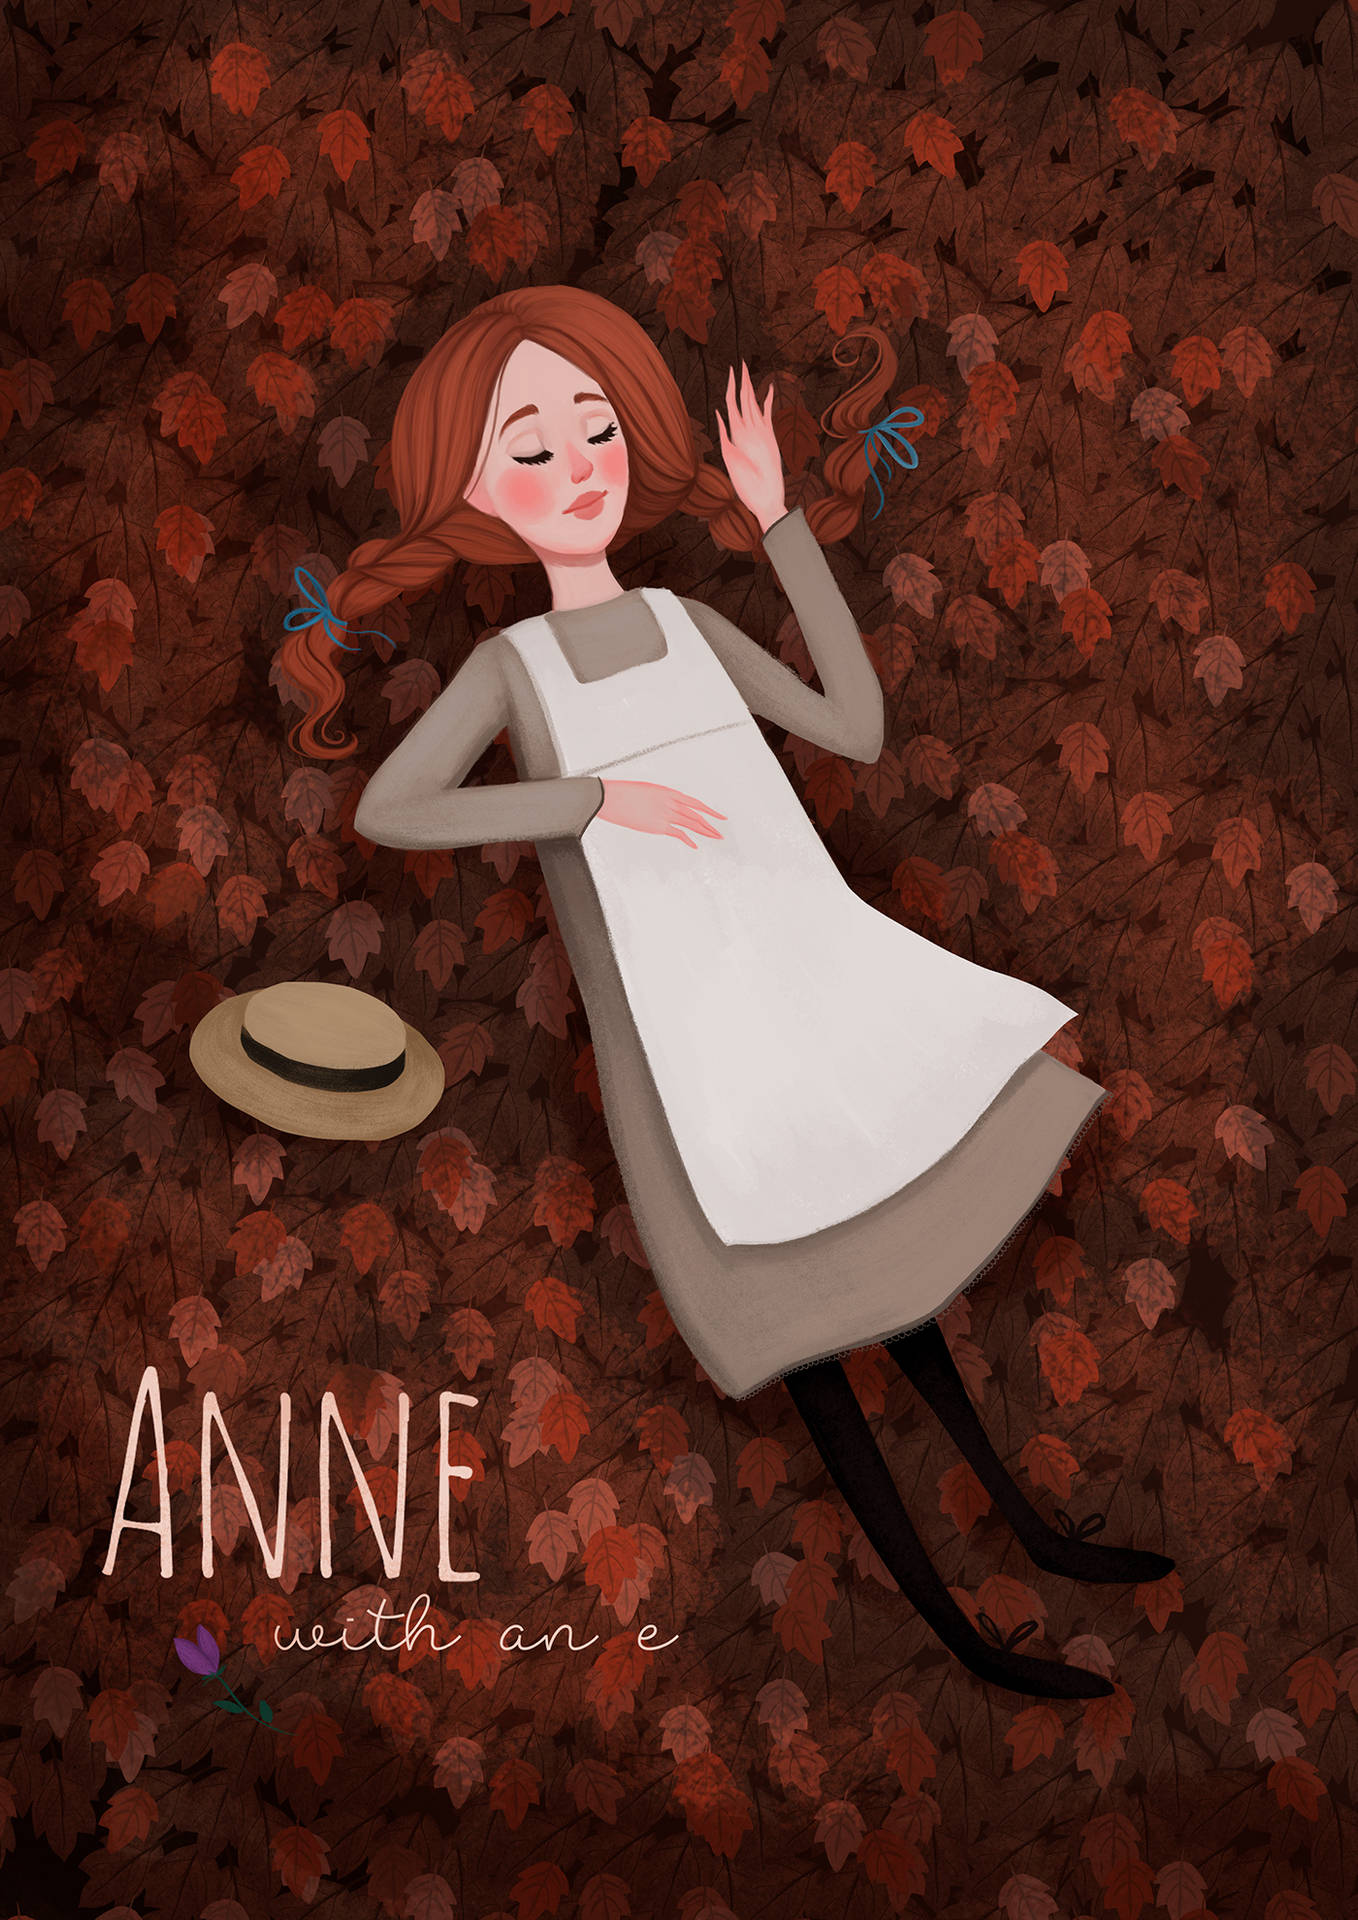 Free Anne With An E Wallpaper Downloads, [100+] Anne With An E Wallpapers  for FREE 